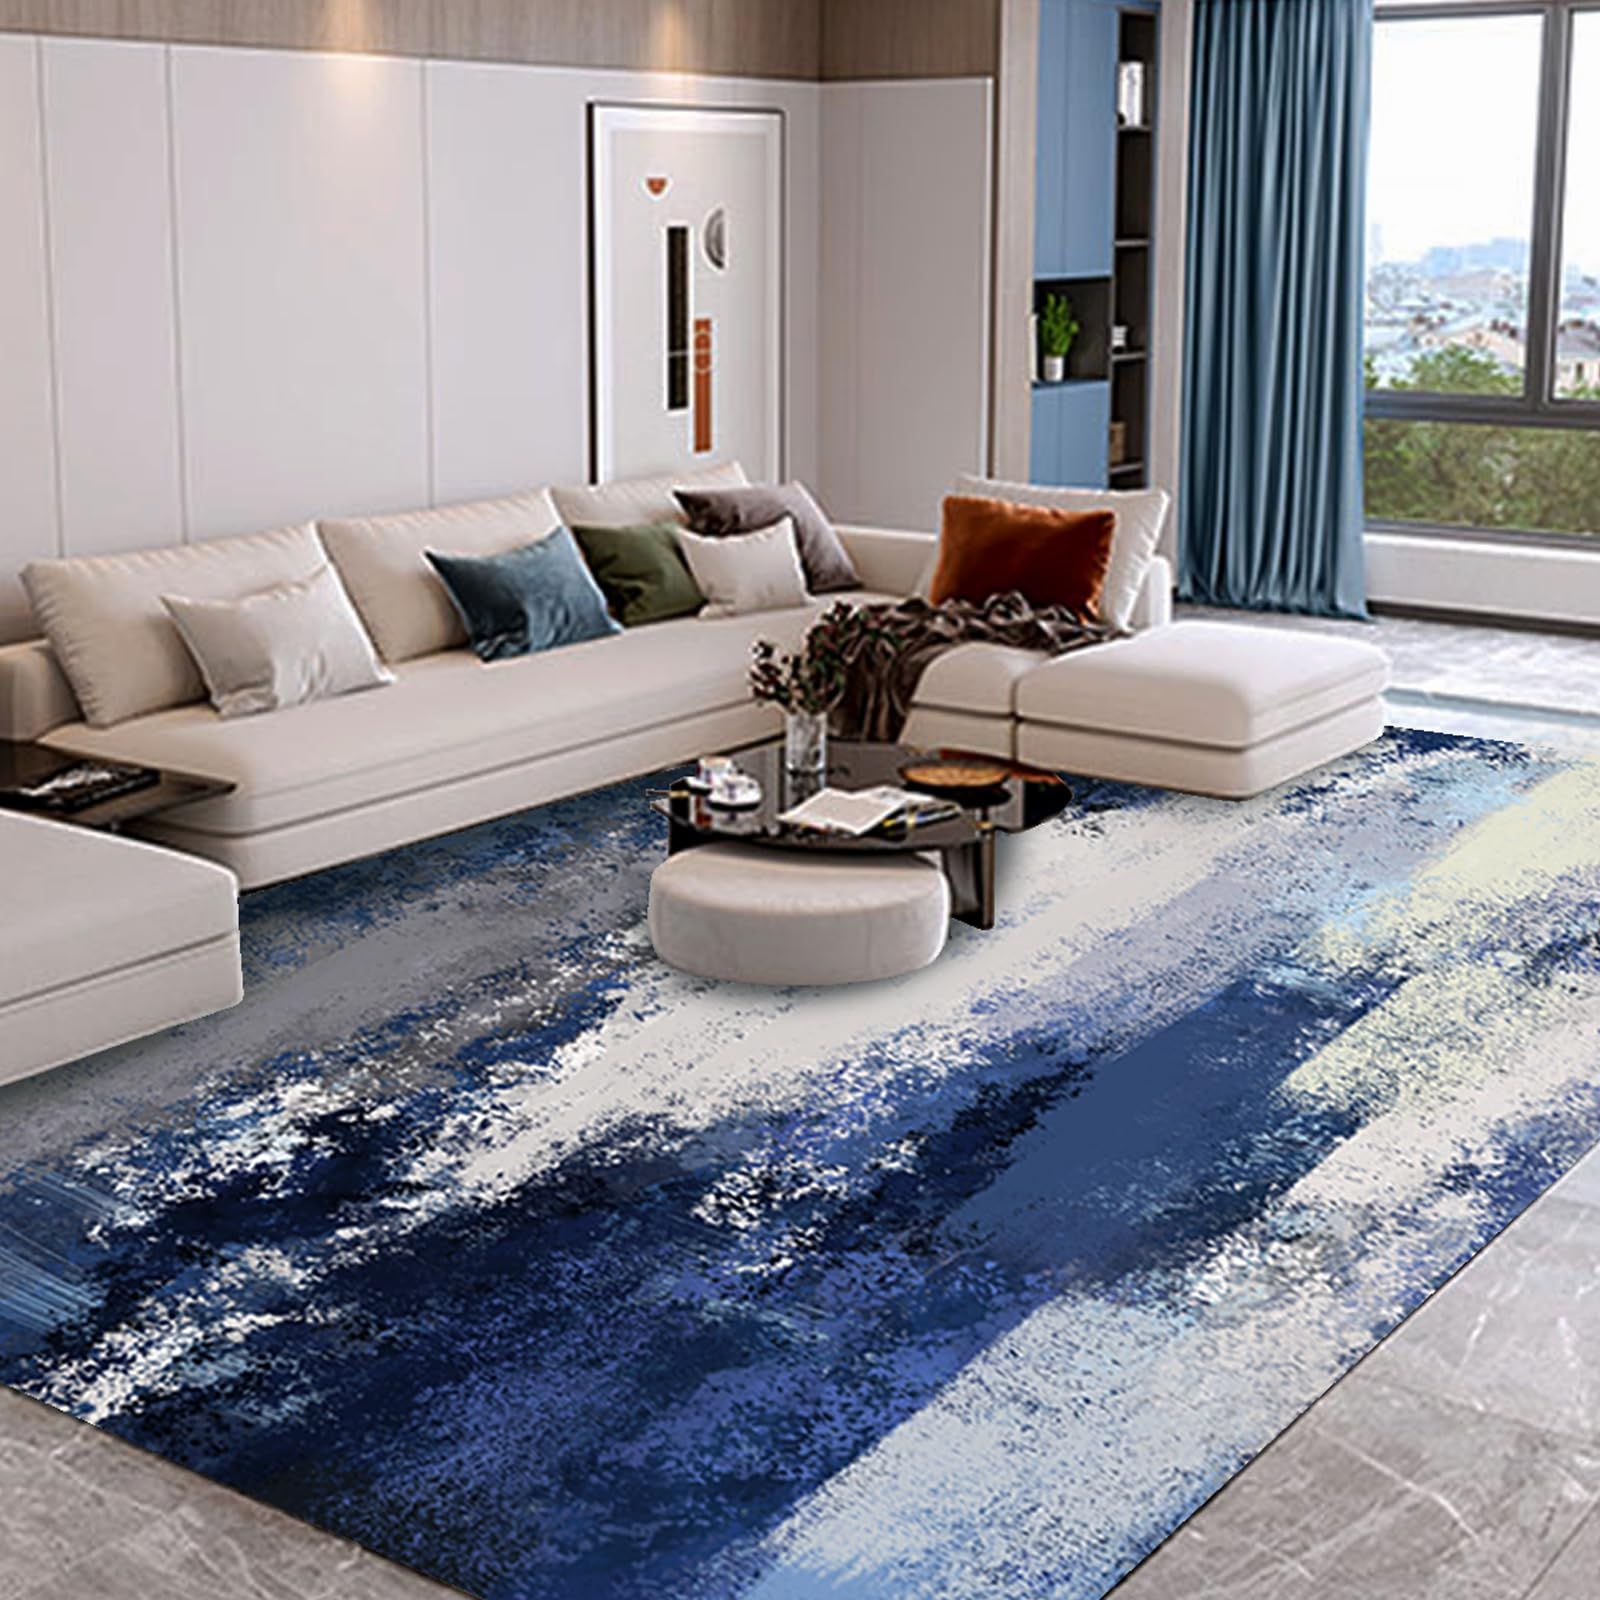 Upgrade Your Living Room with Modern Blue Area Rugs